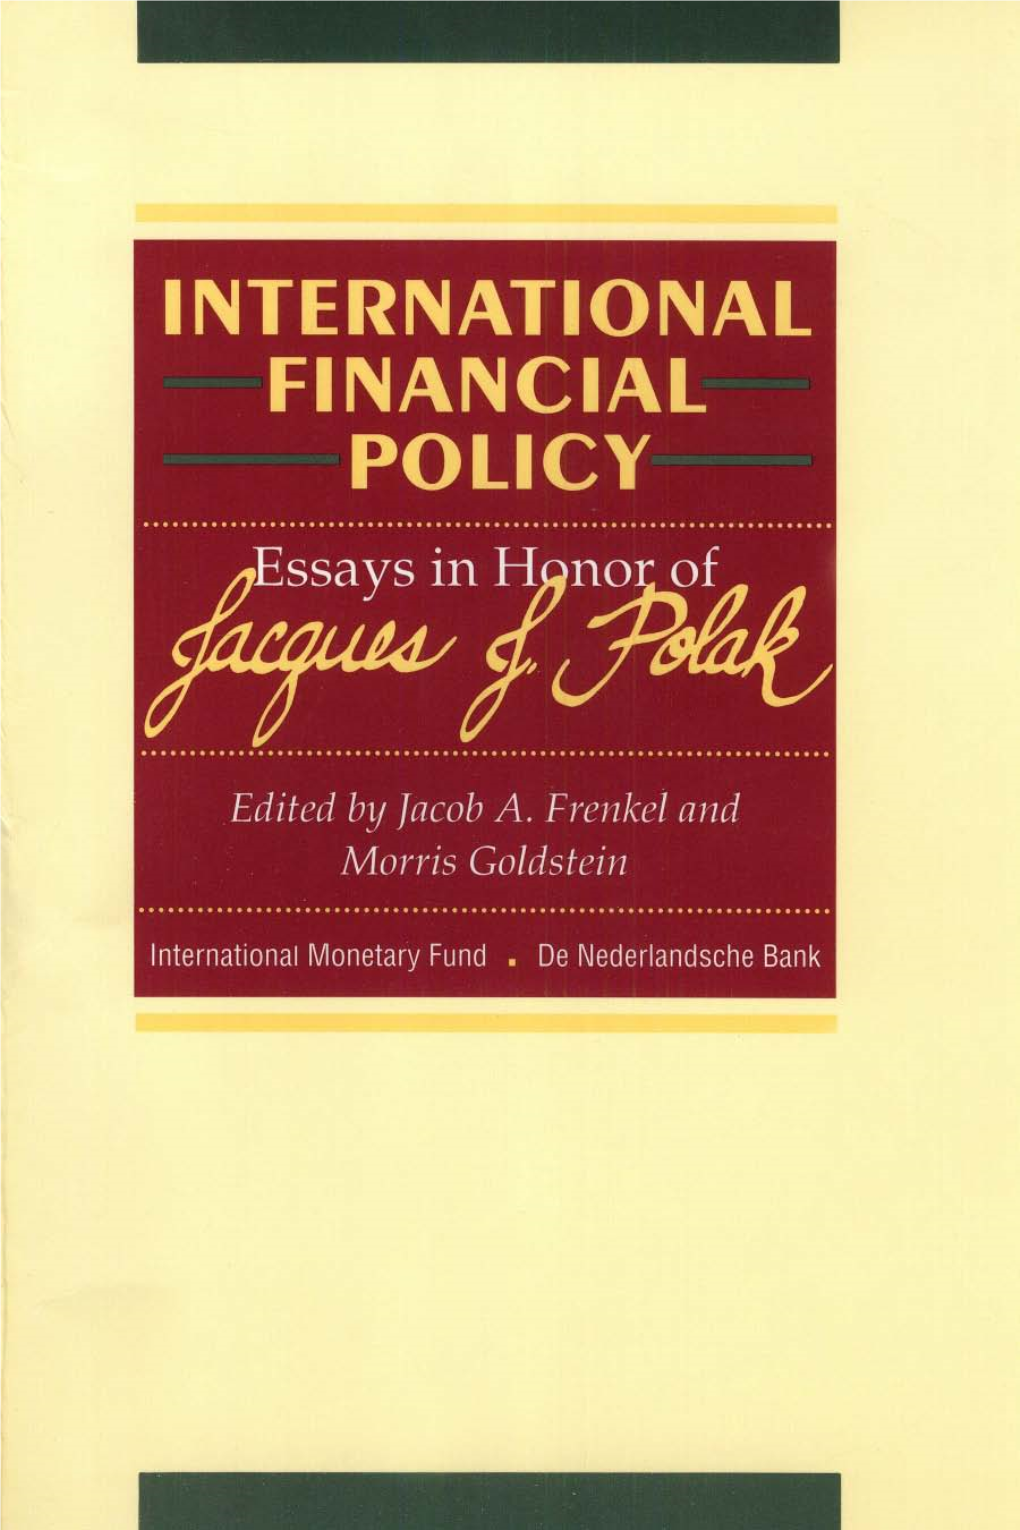 International Financial Policy: Essays in Honor of Jacques J. Polak